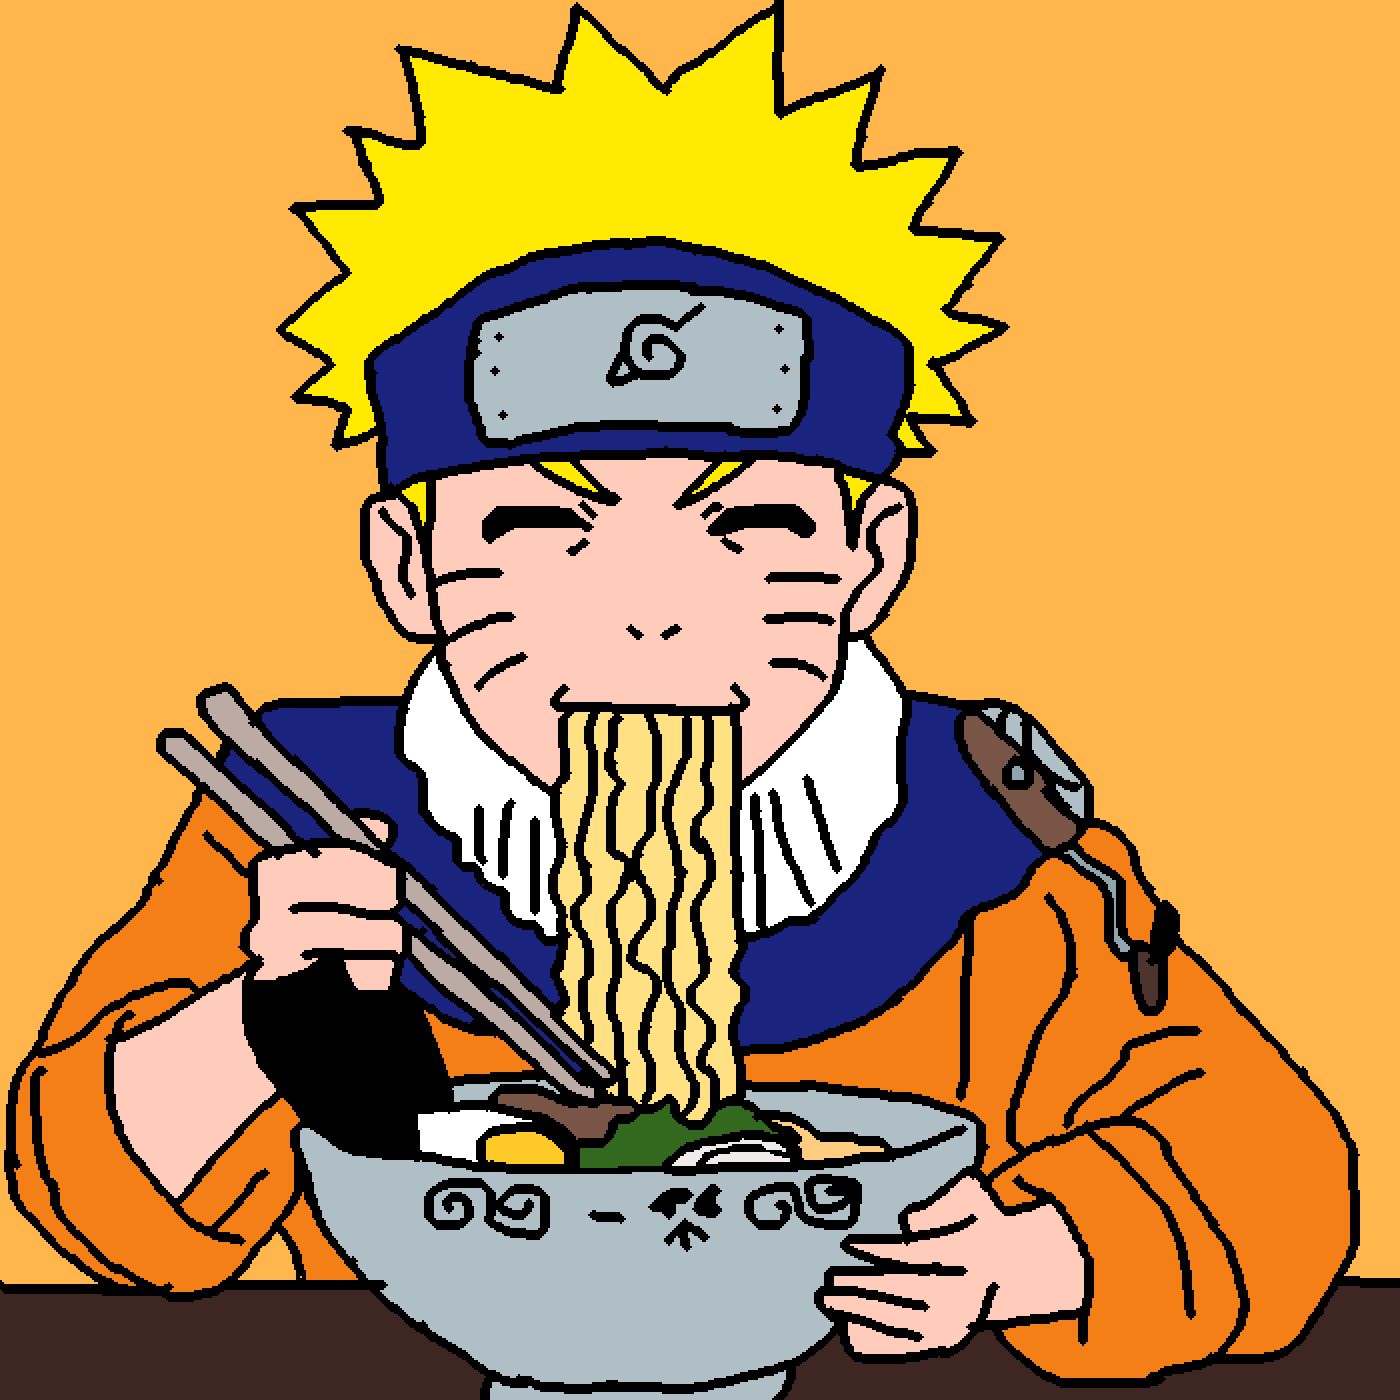 Naruto’s Favorite Ramen Revealed! You Won’t Believe His Top Pick!